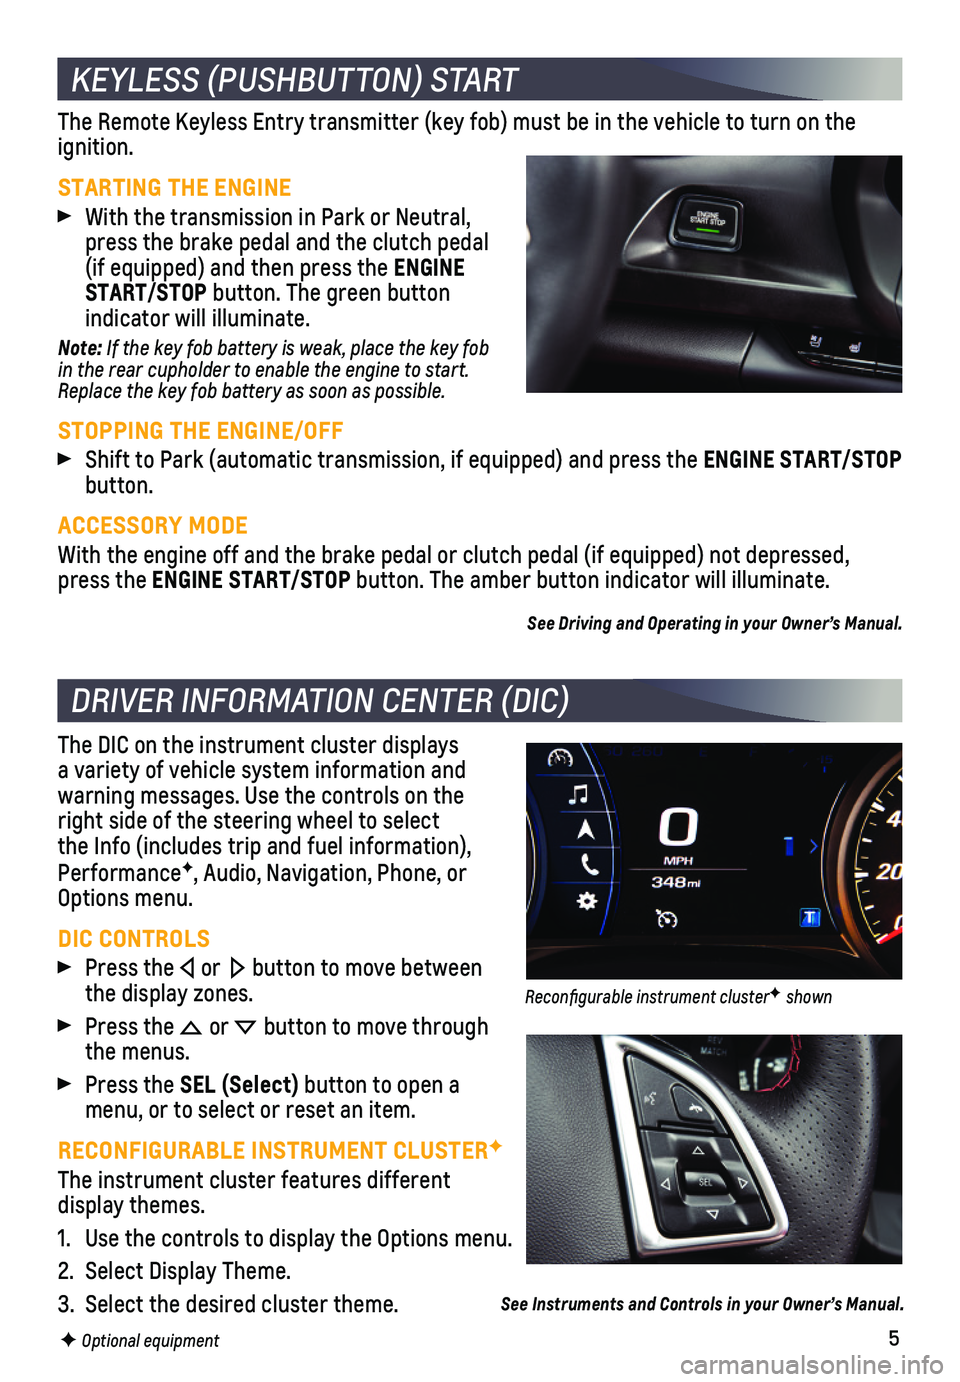 CHEVROLET CAMARO 2021  Get To Know Guide 5
The Remote Keyless Entry transmitter (key fob) must be in the vehicle \
to turn on the ignition.
STARTING THE ENGINE
 With the transmission in Park or Neutral, press the brake pedal and the clutch p